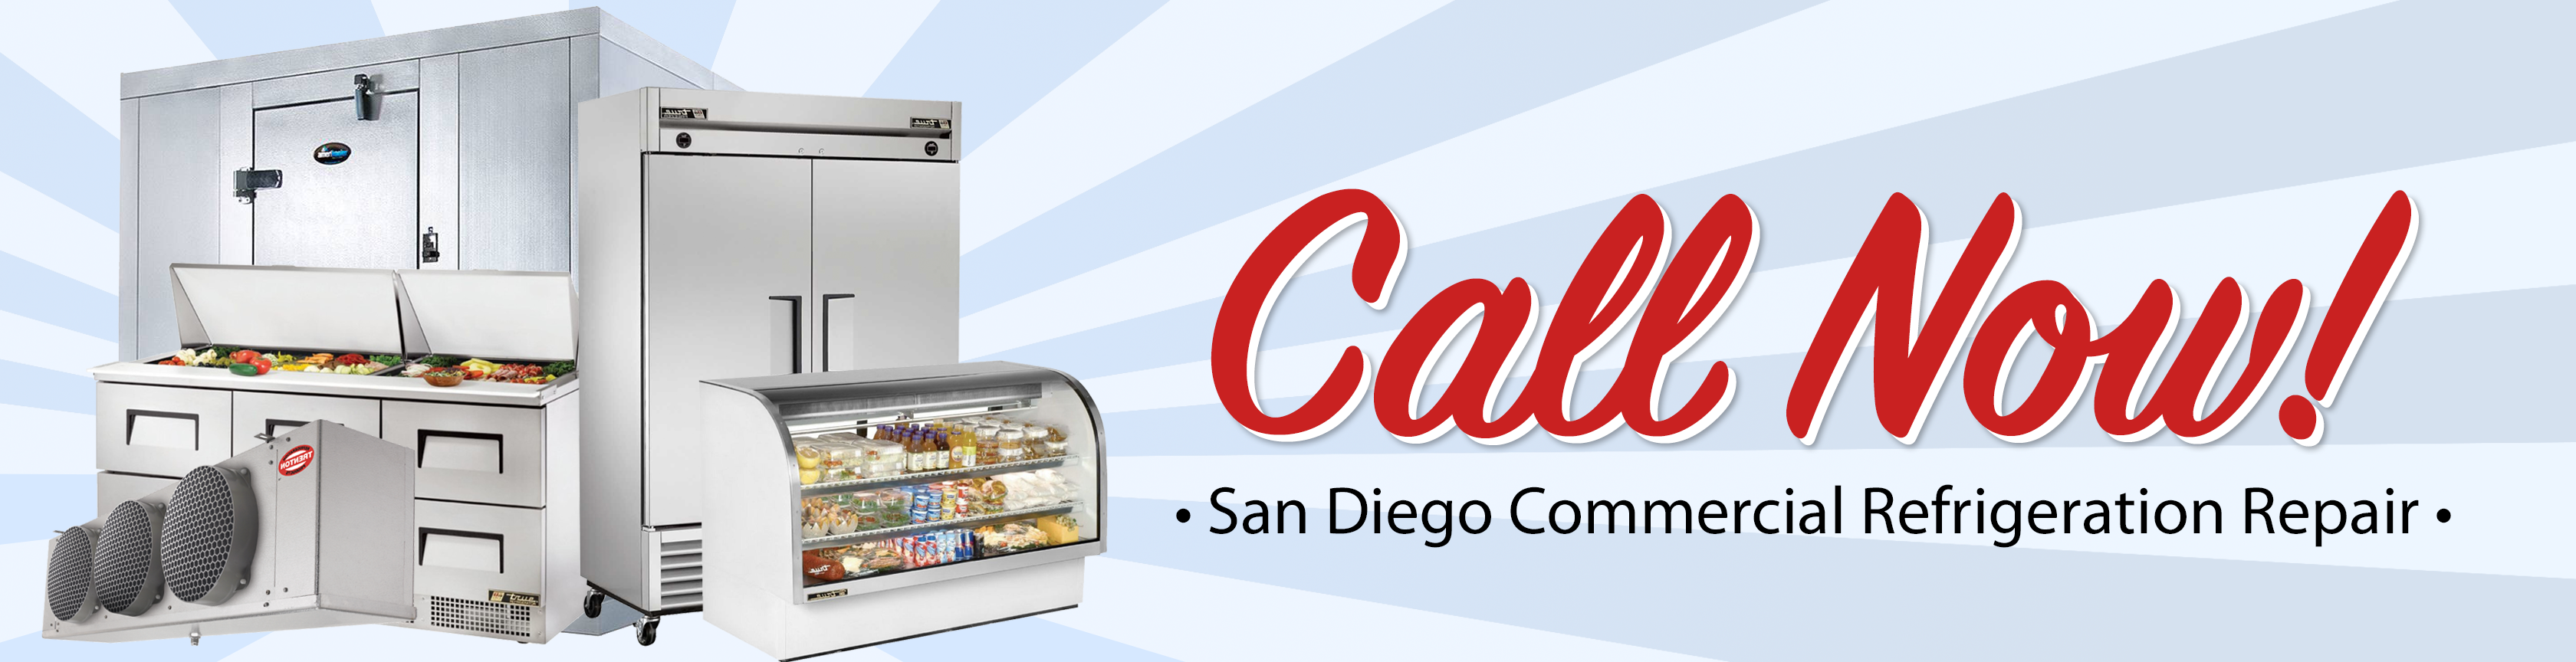 Commercial Refrigeration Repair in San Diego